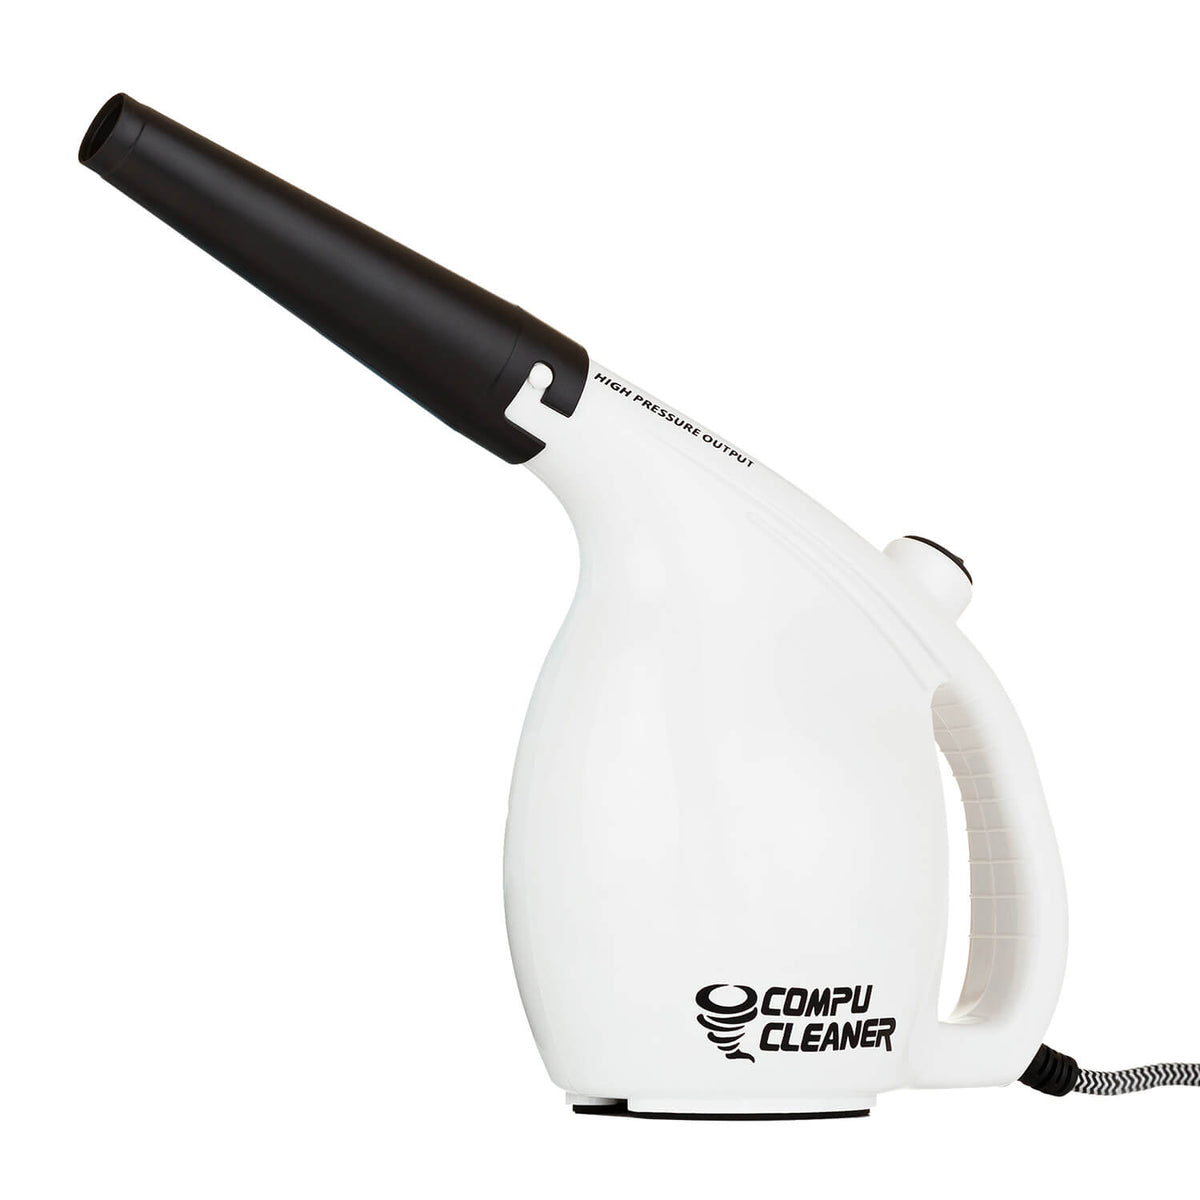 CompuCleaner: A Compact, Mains-Powered Air Duster For Your Home